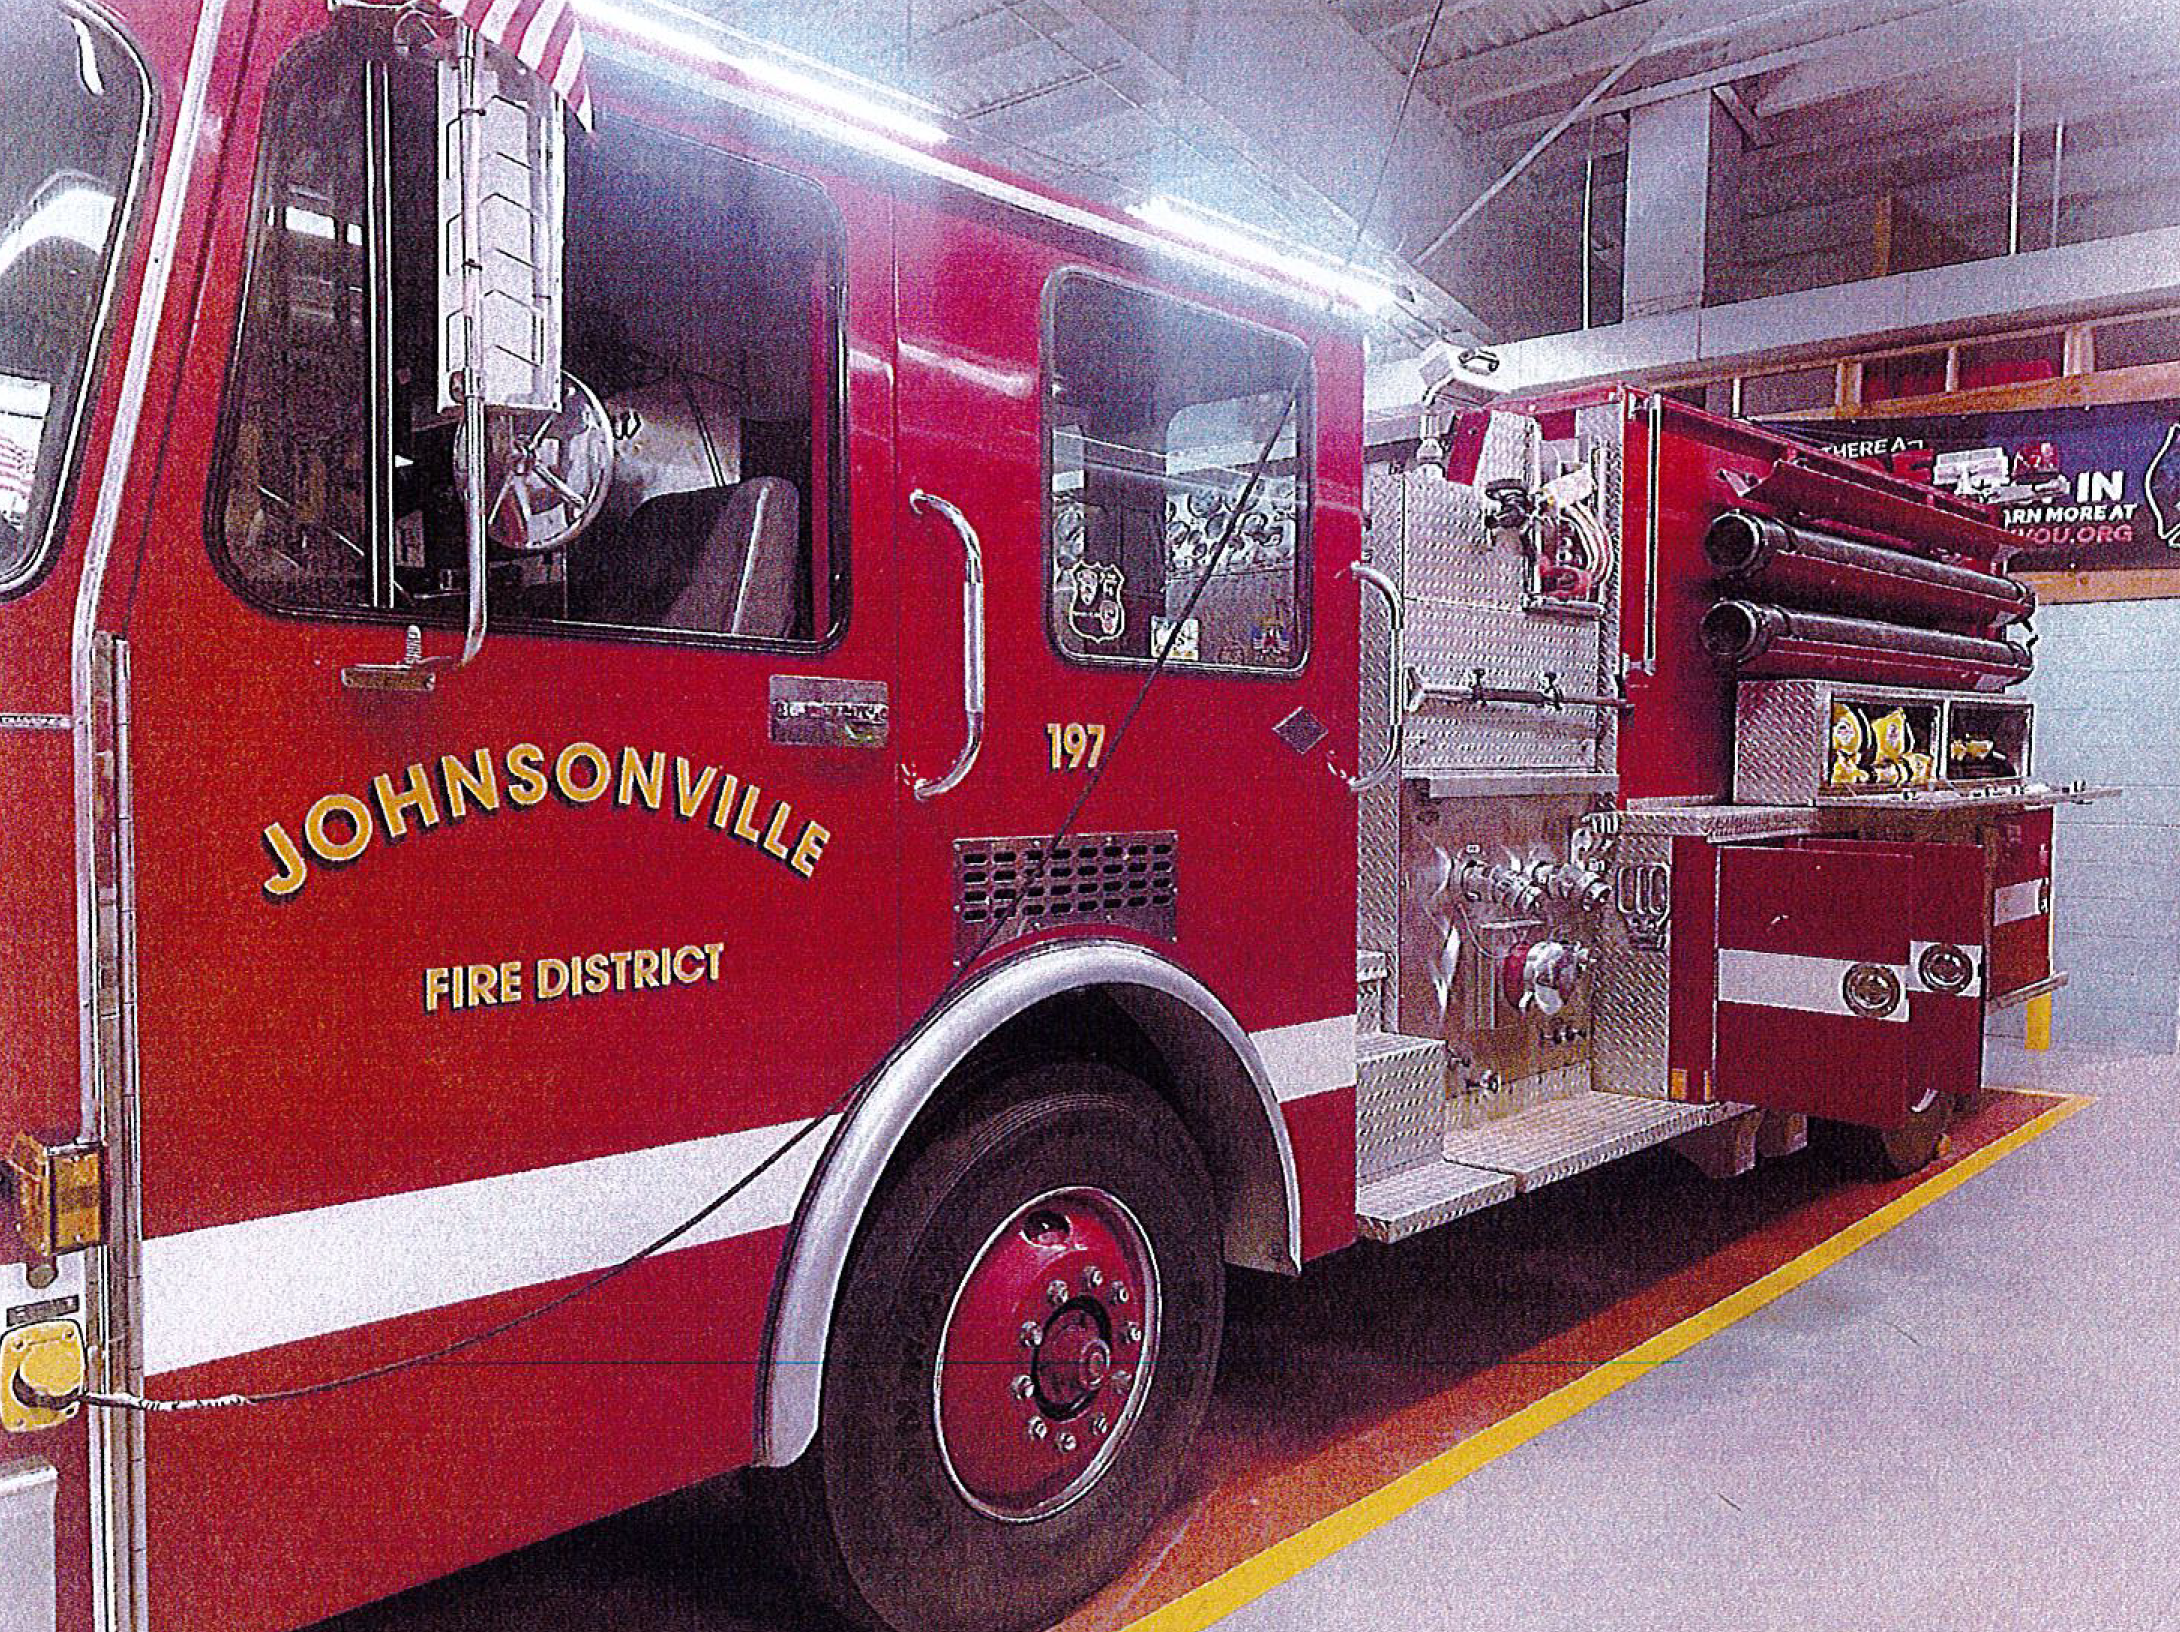 red fire truck reads Johnsonville fire district on side